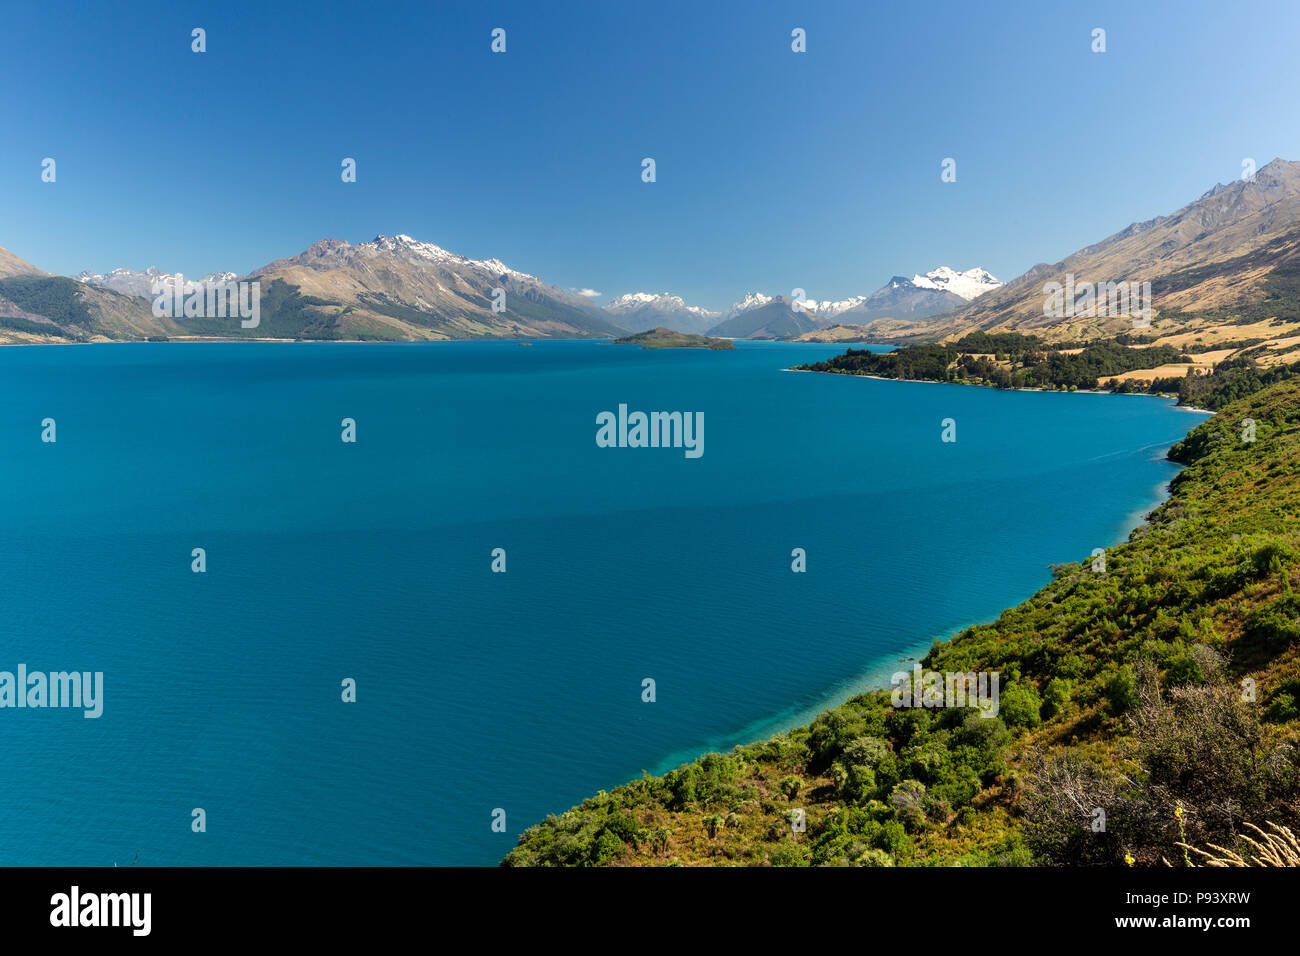 Glenorchy at South Island of New Zealand Stock Photo